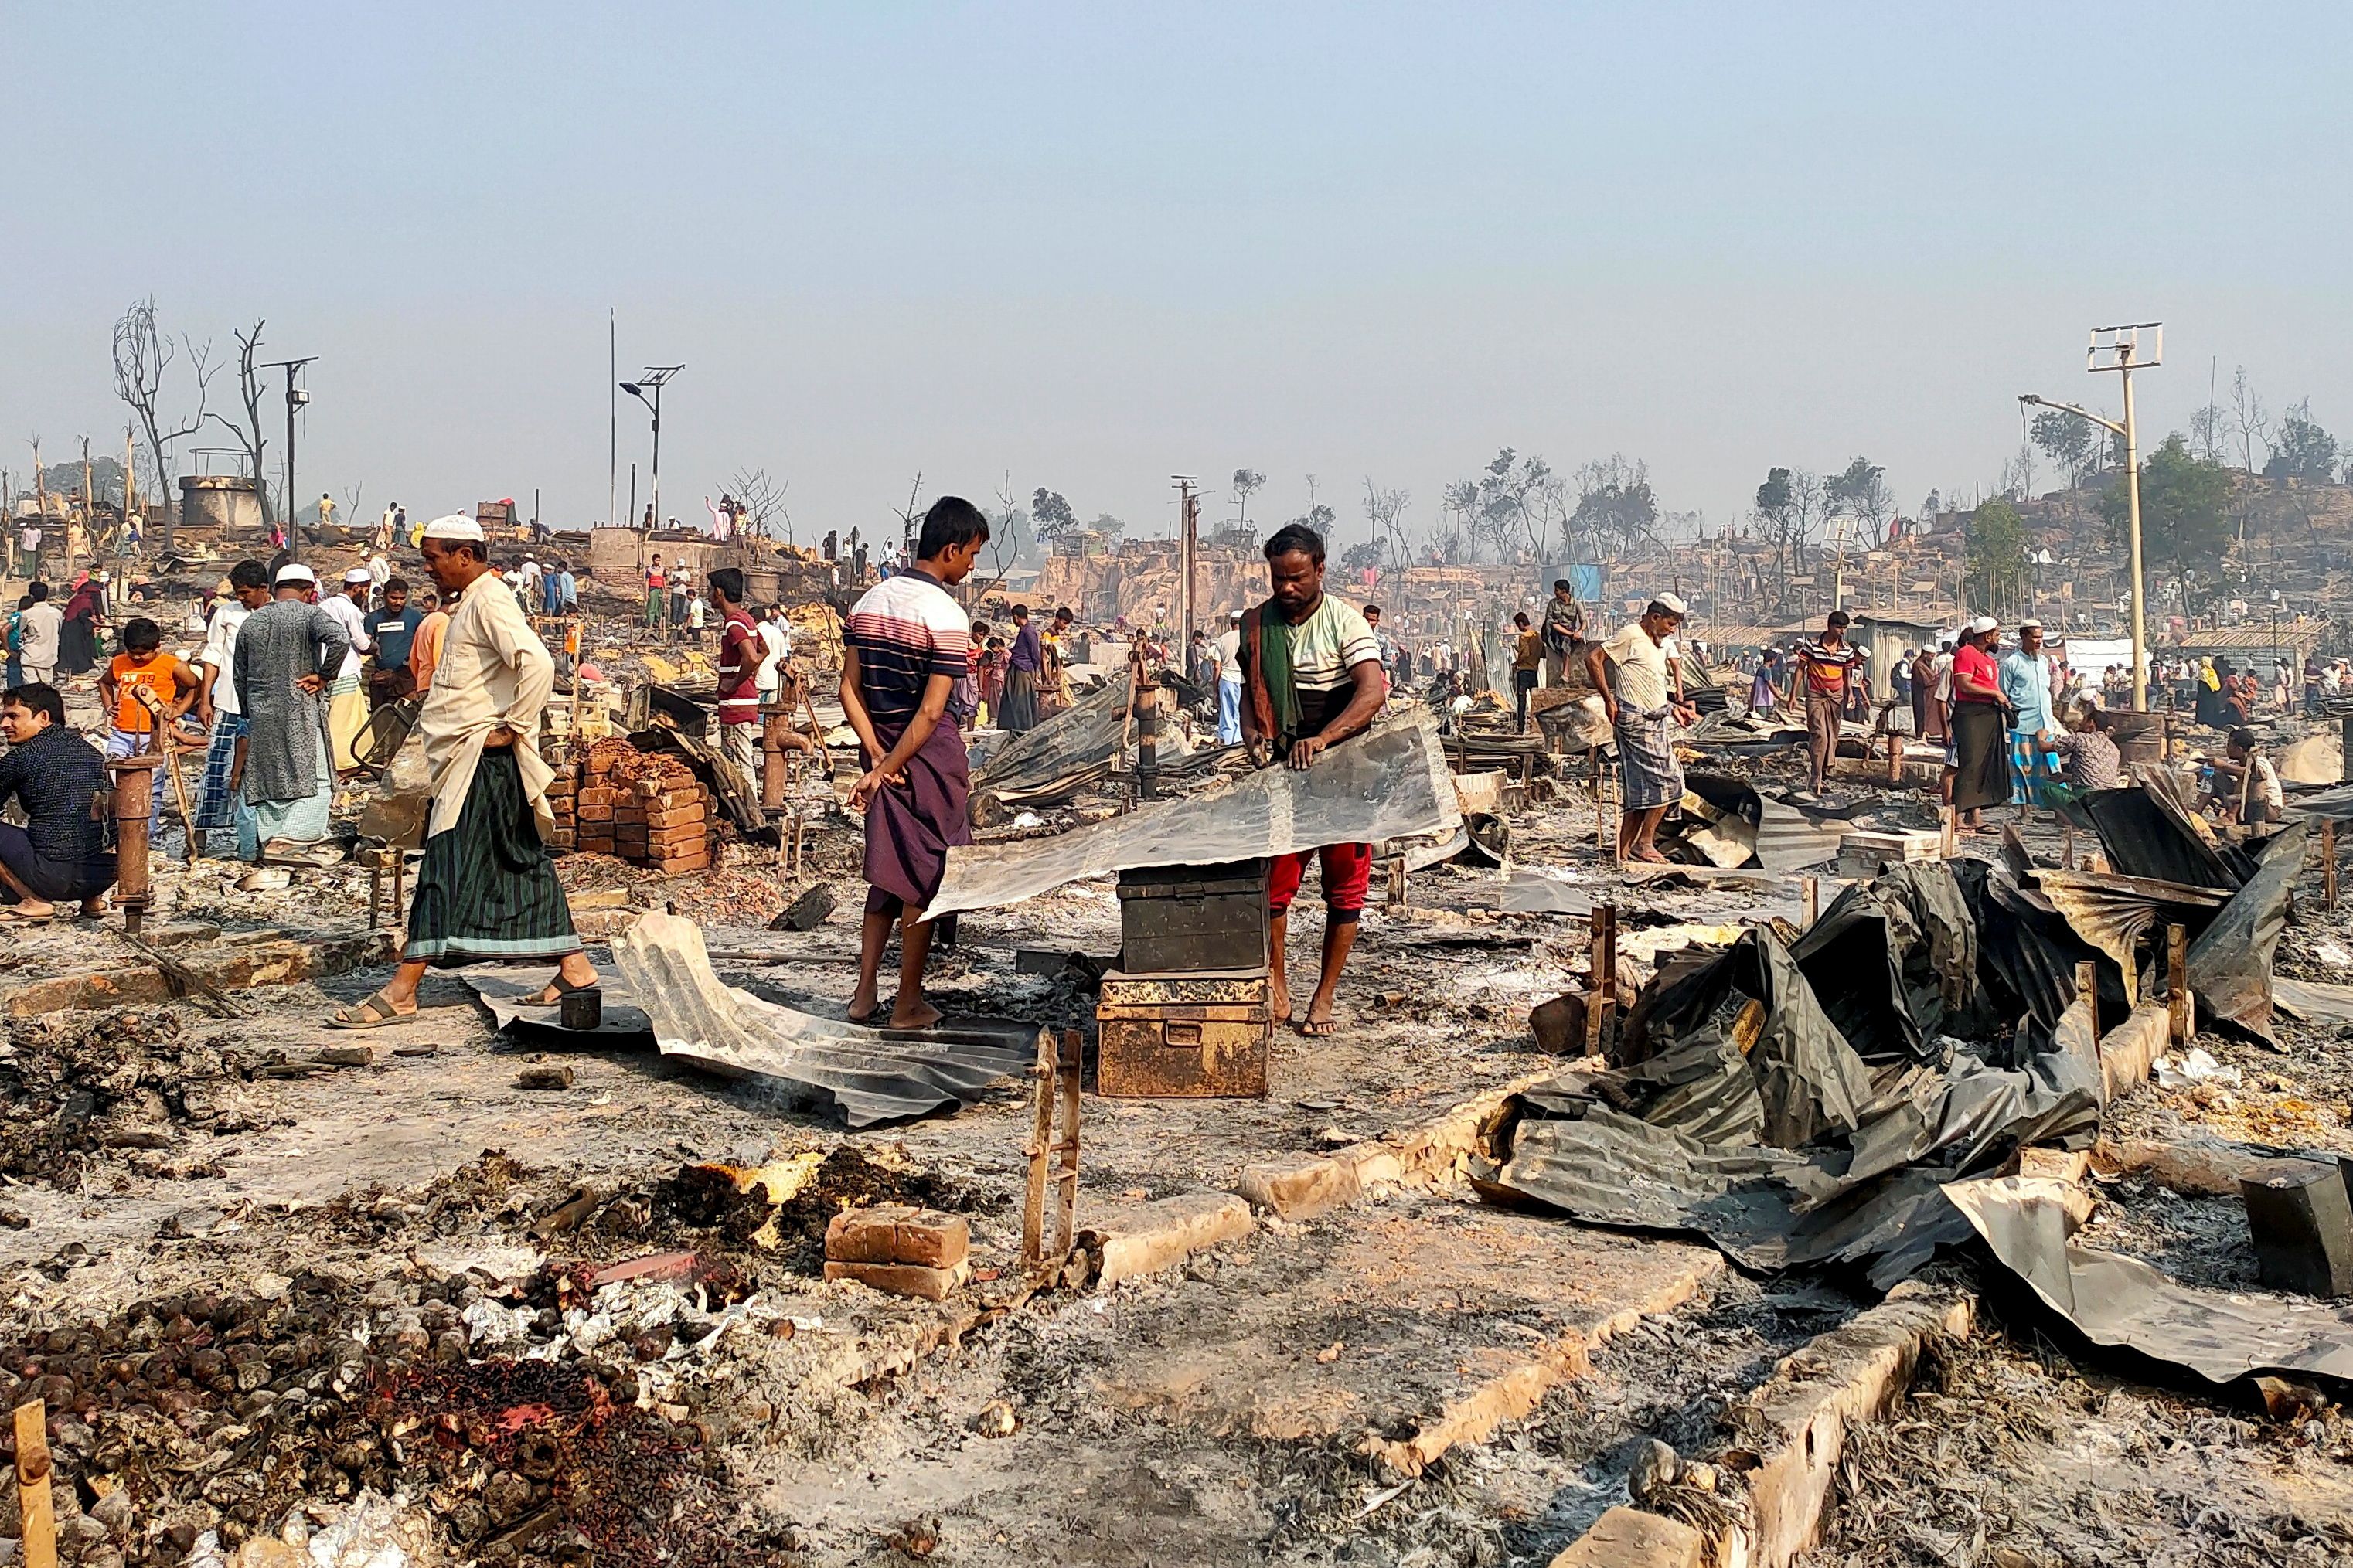 Fire destroys homes in Rohingya refugee camp in Cox's Bazar